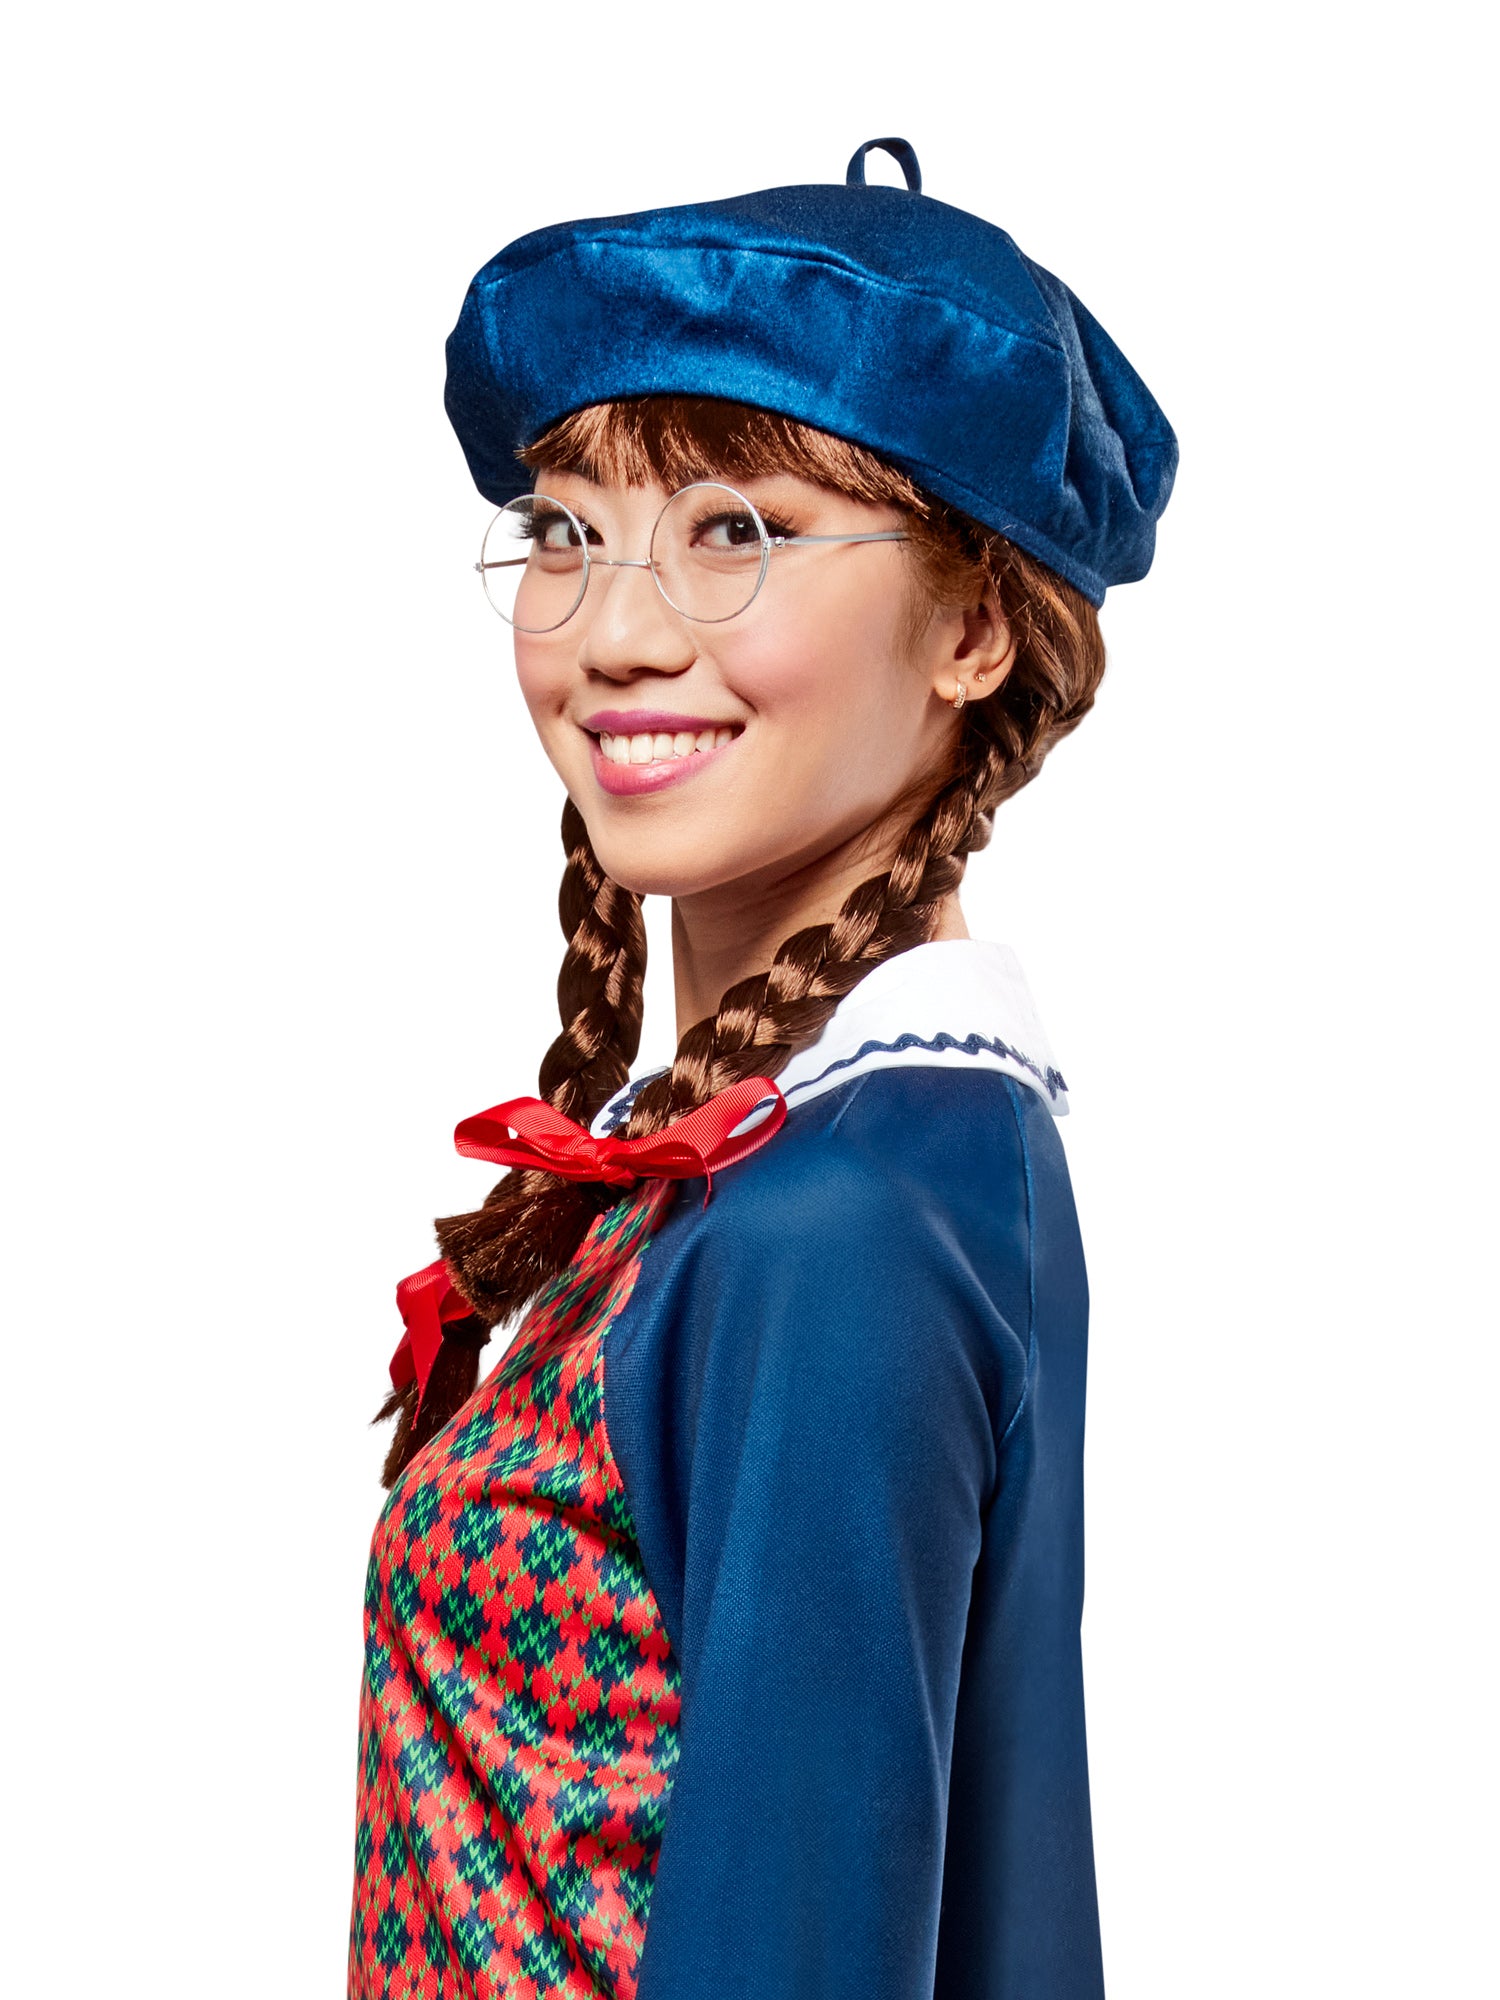 Women's American Girl Molly McIntire Brown Braided Ponytail Wig - costumes.com